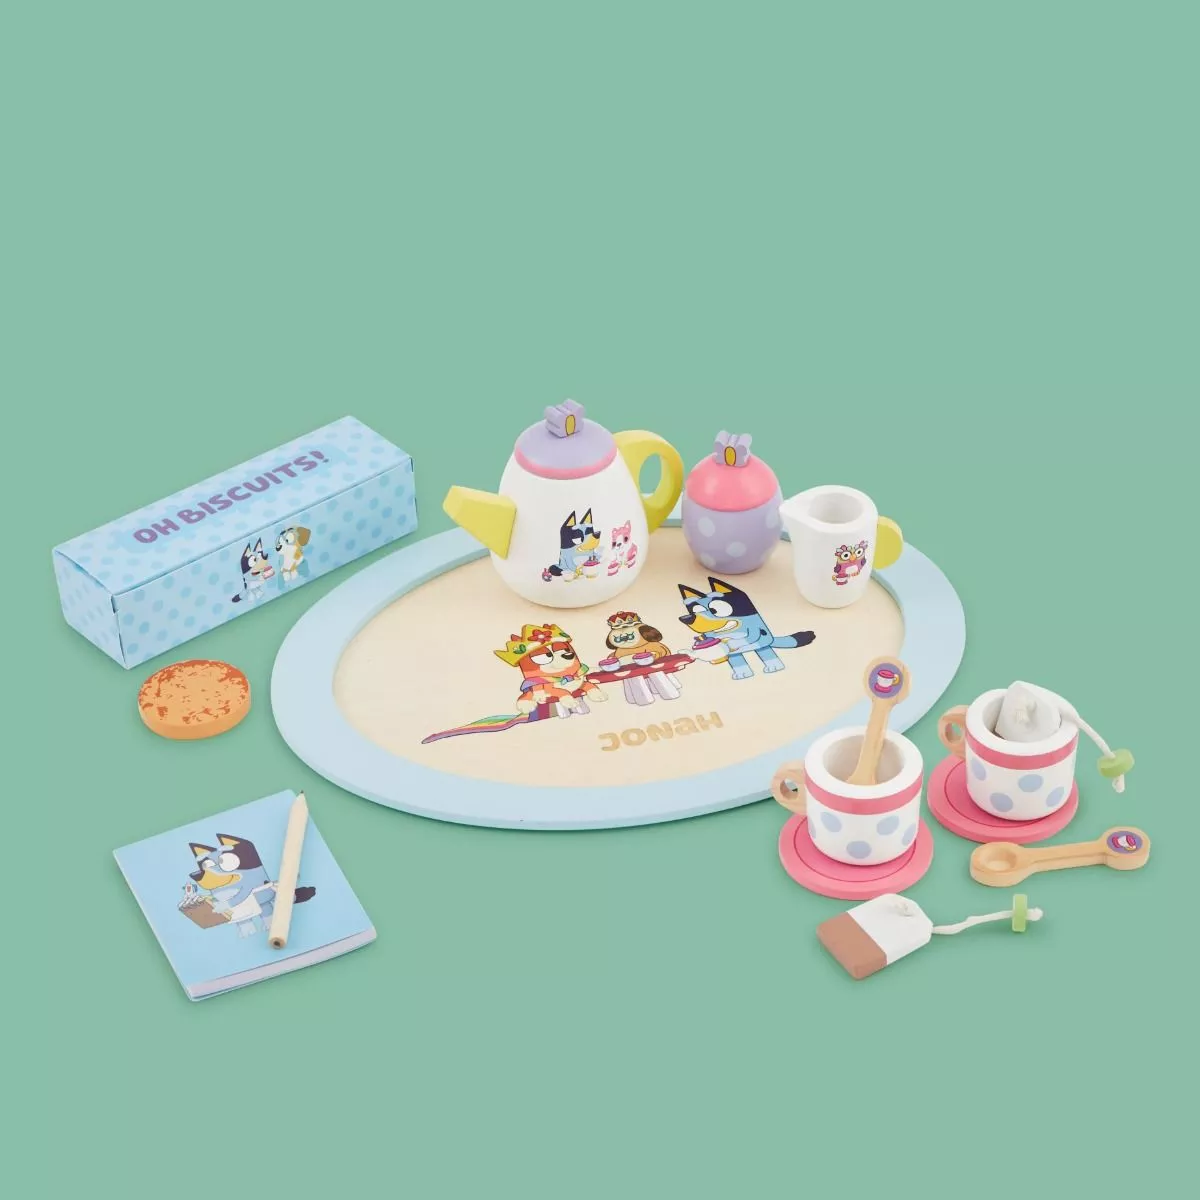 Bluey Paint & Play Tea Party, 6-Piece Wooden Tea Set, Customize with Paint  & Bluey Stickers, 2 Wearable Crowns, Fun Toys for Kids, Cute Birthday Party